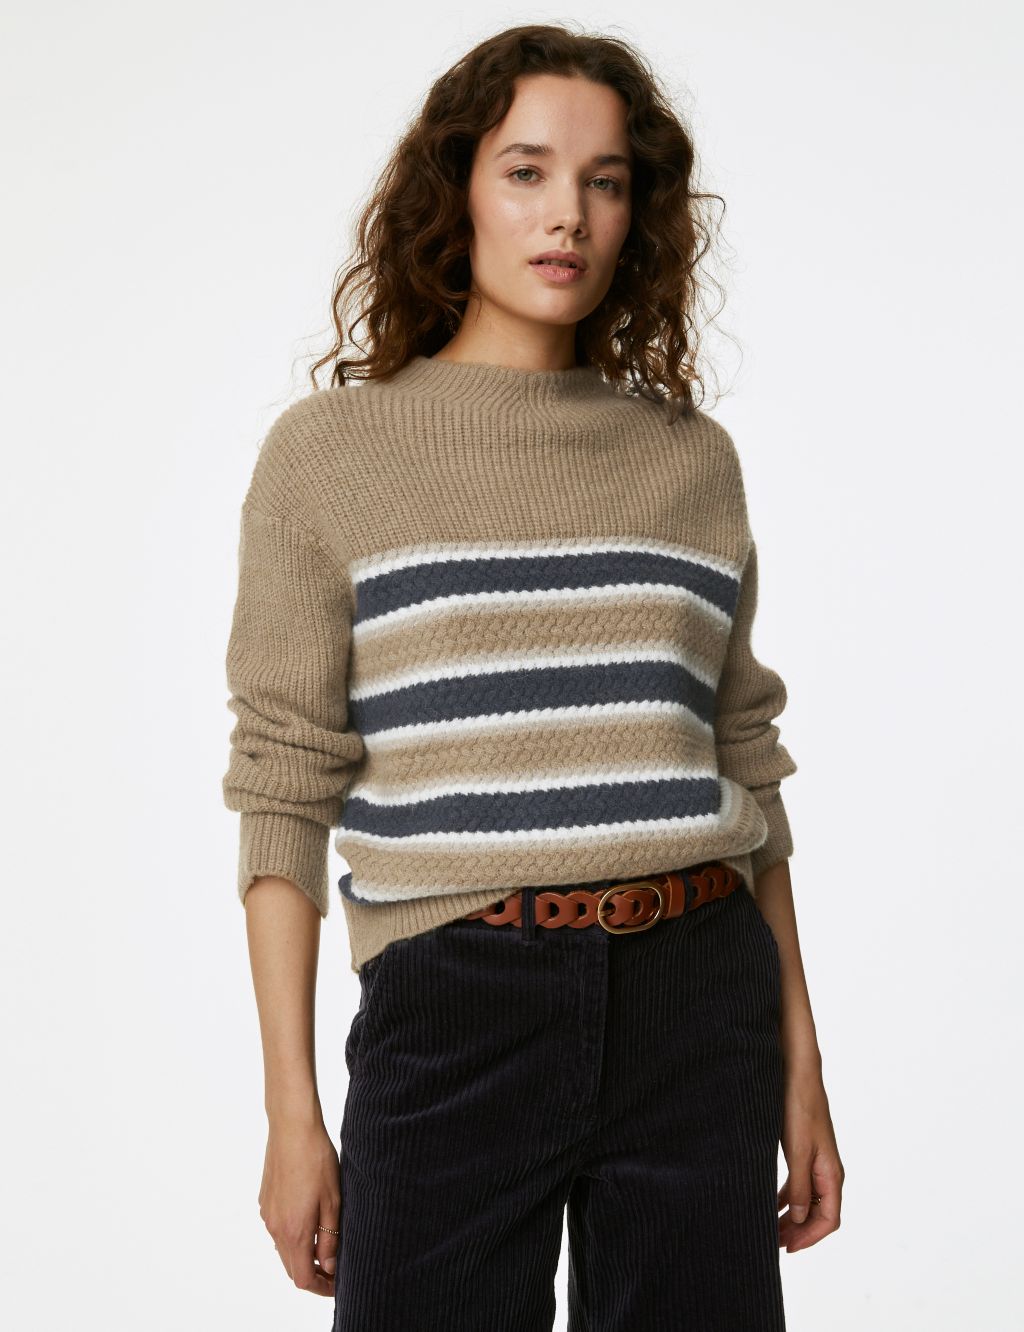 Striped Funnel Neck Jumper with Wool image 3